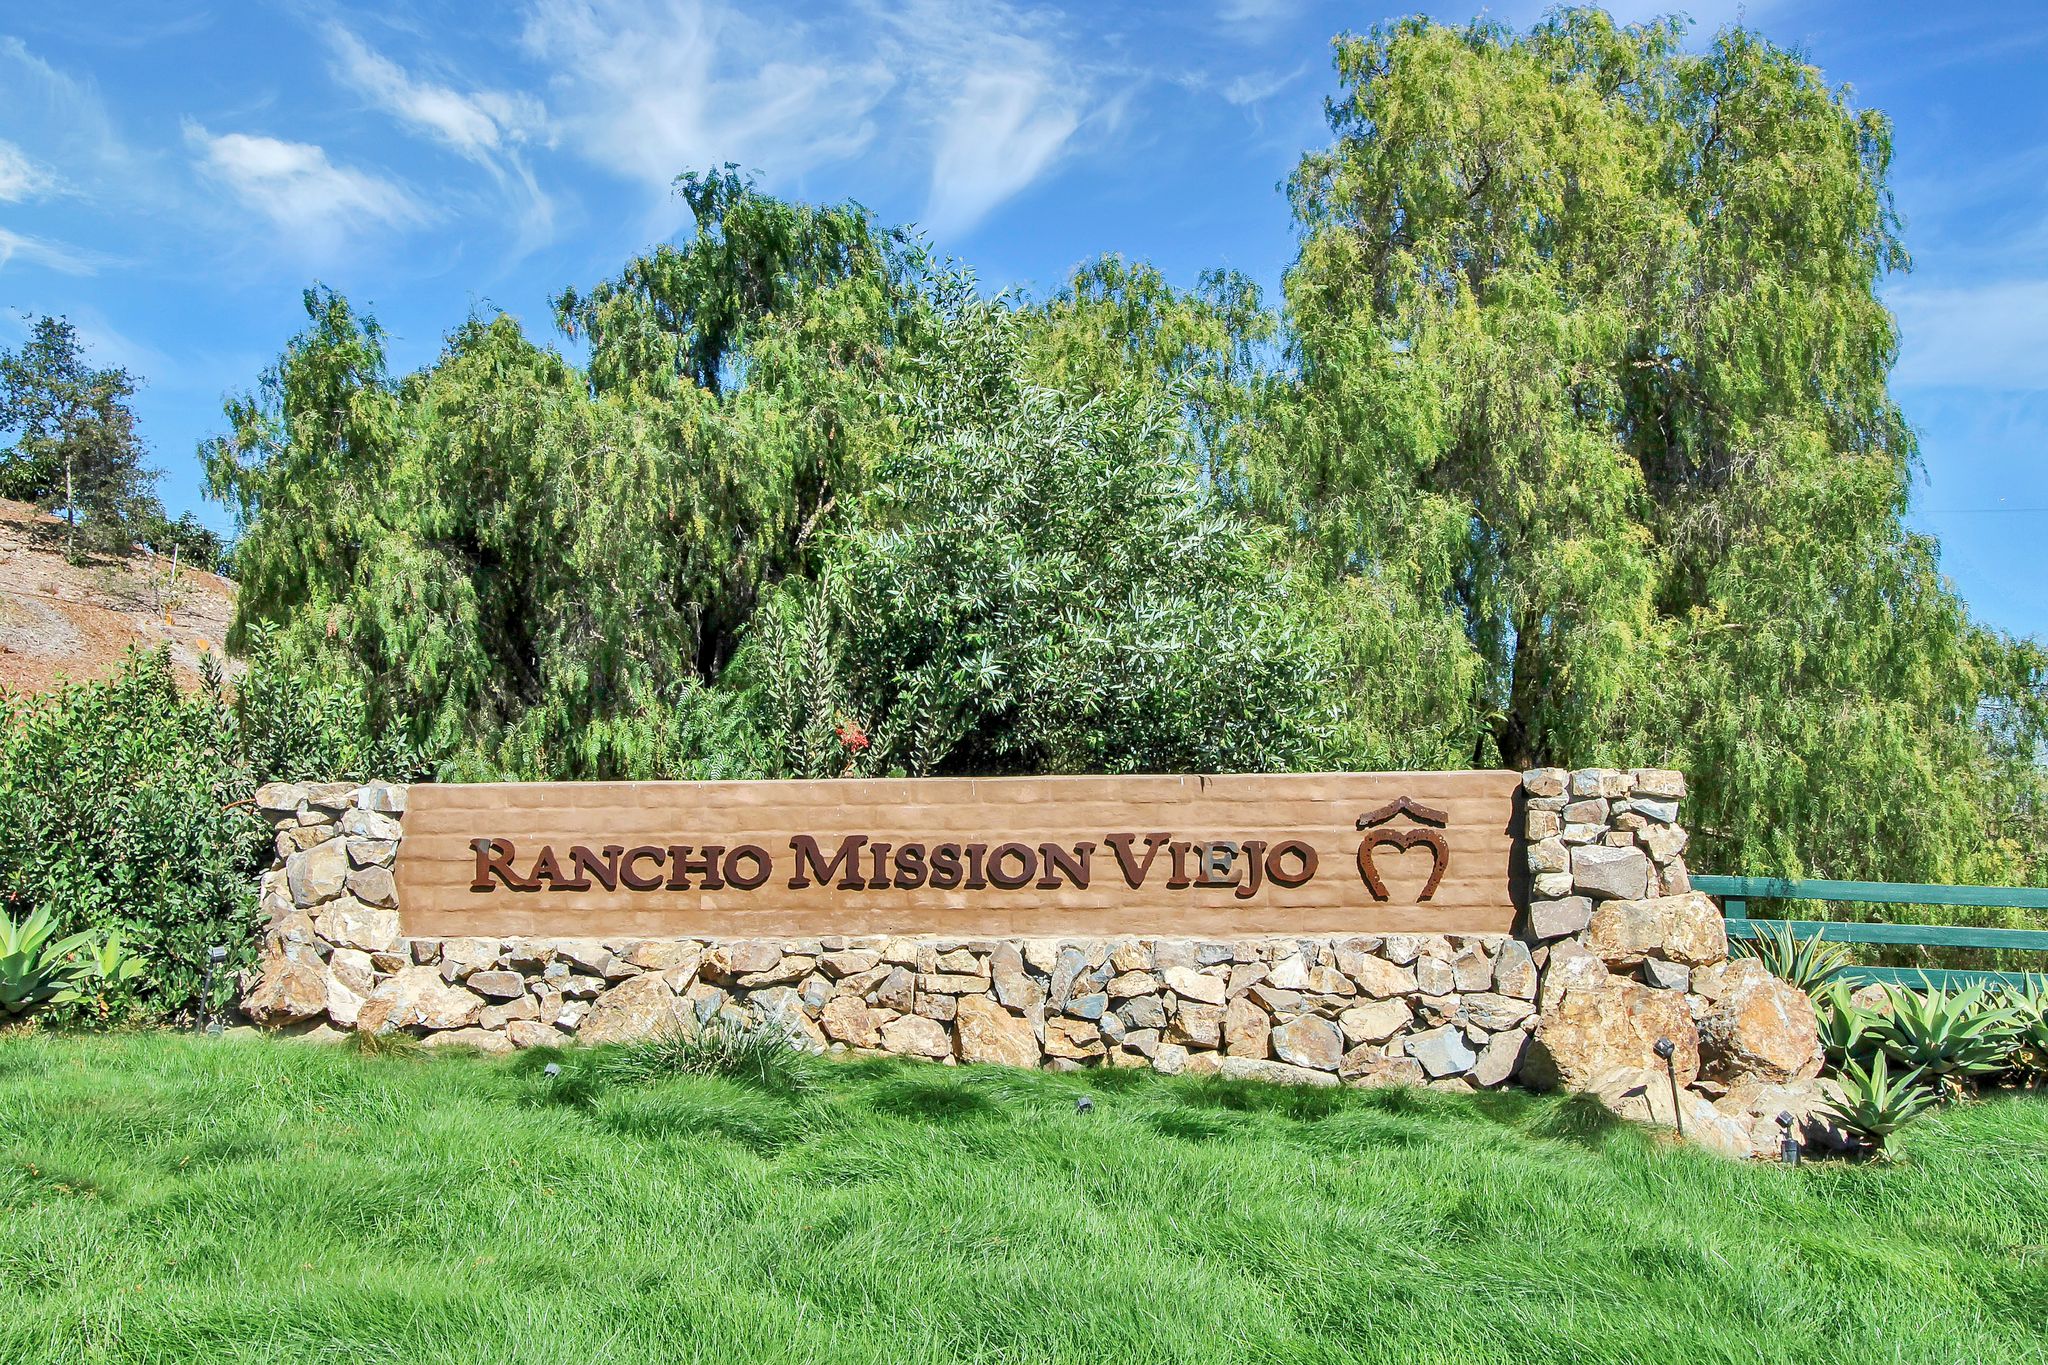 A Day In Rancho Mission Viejo